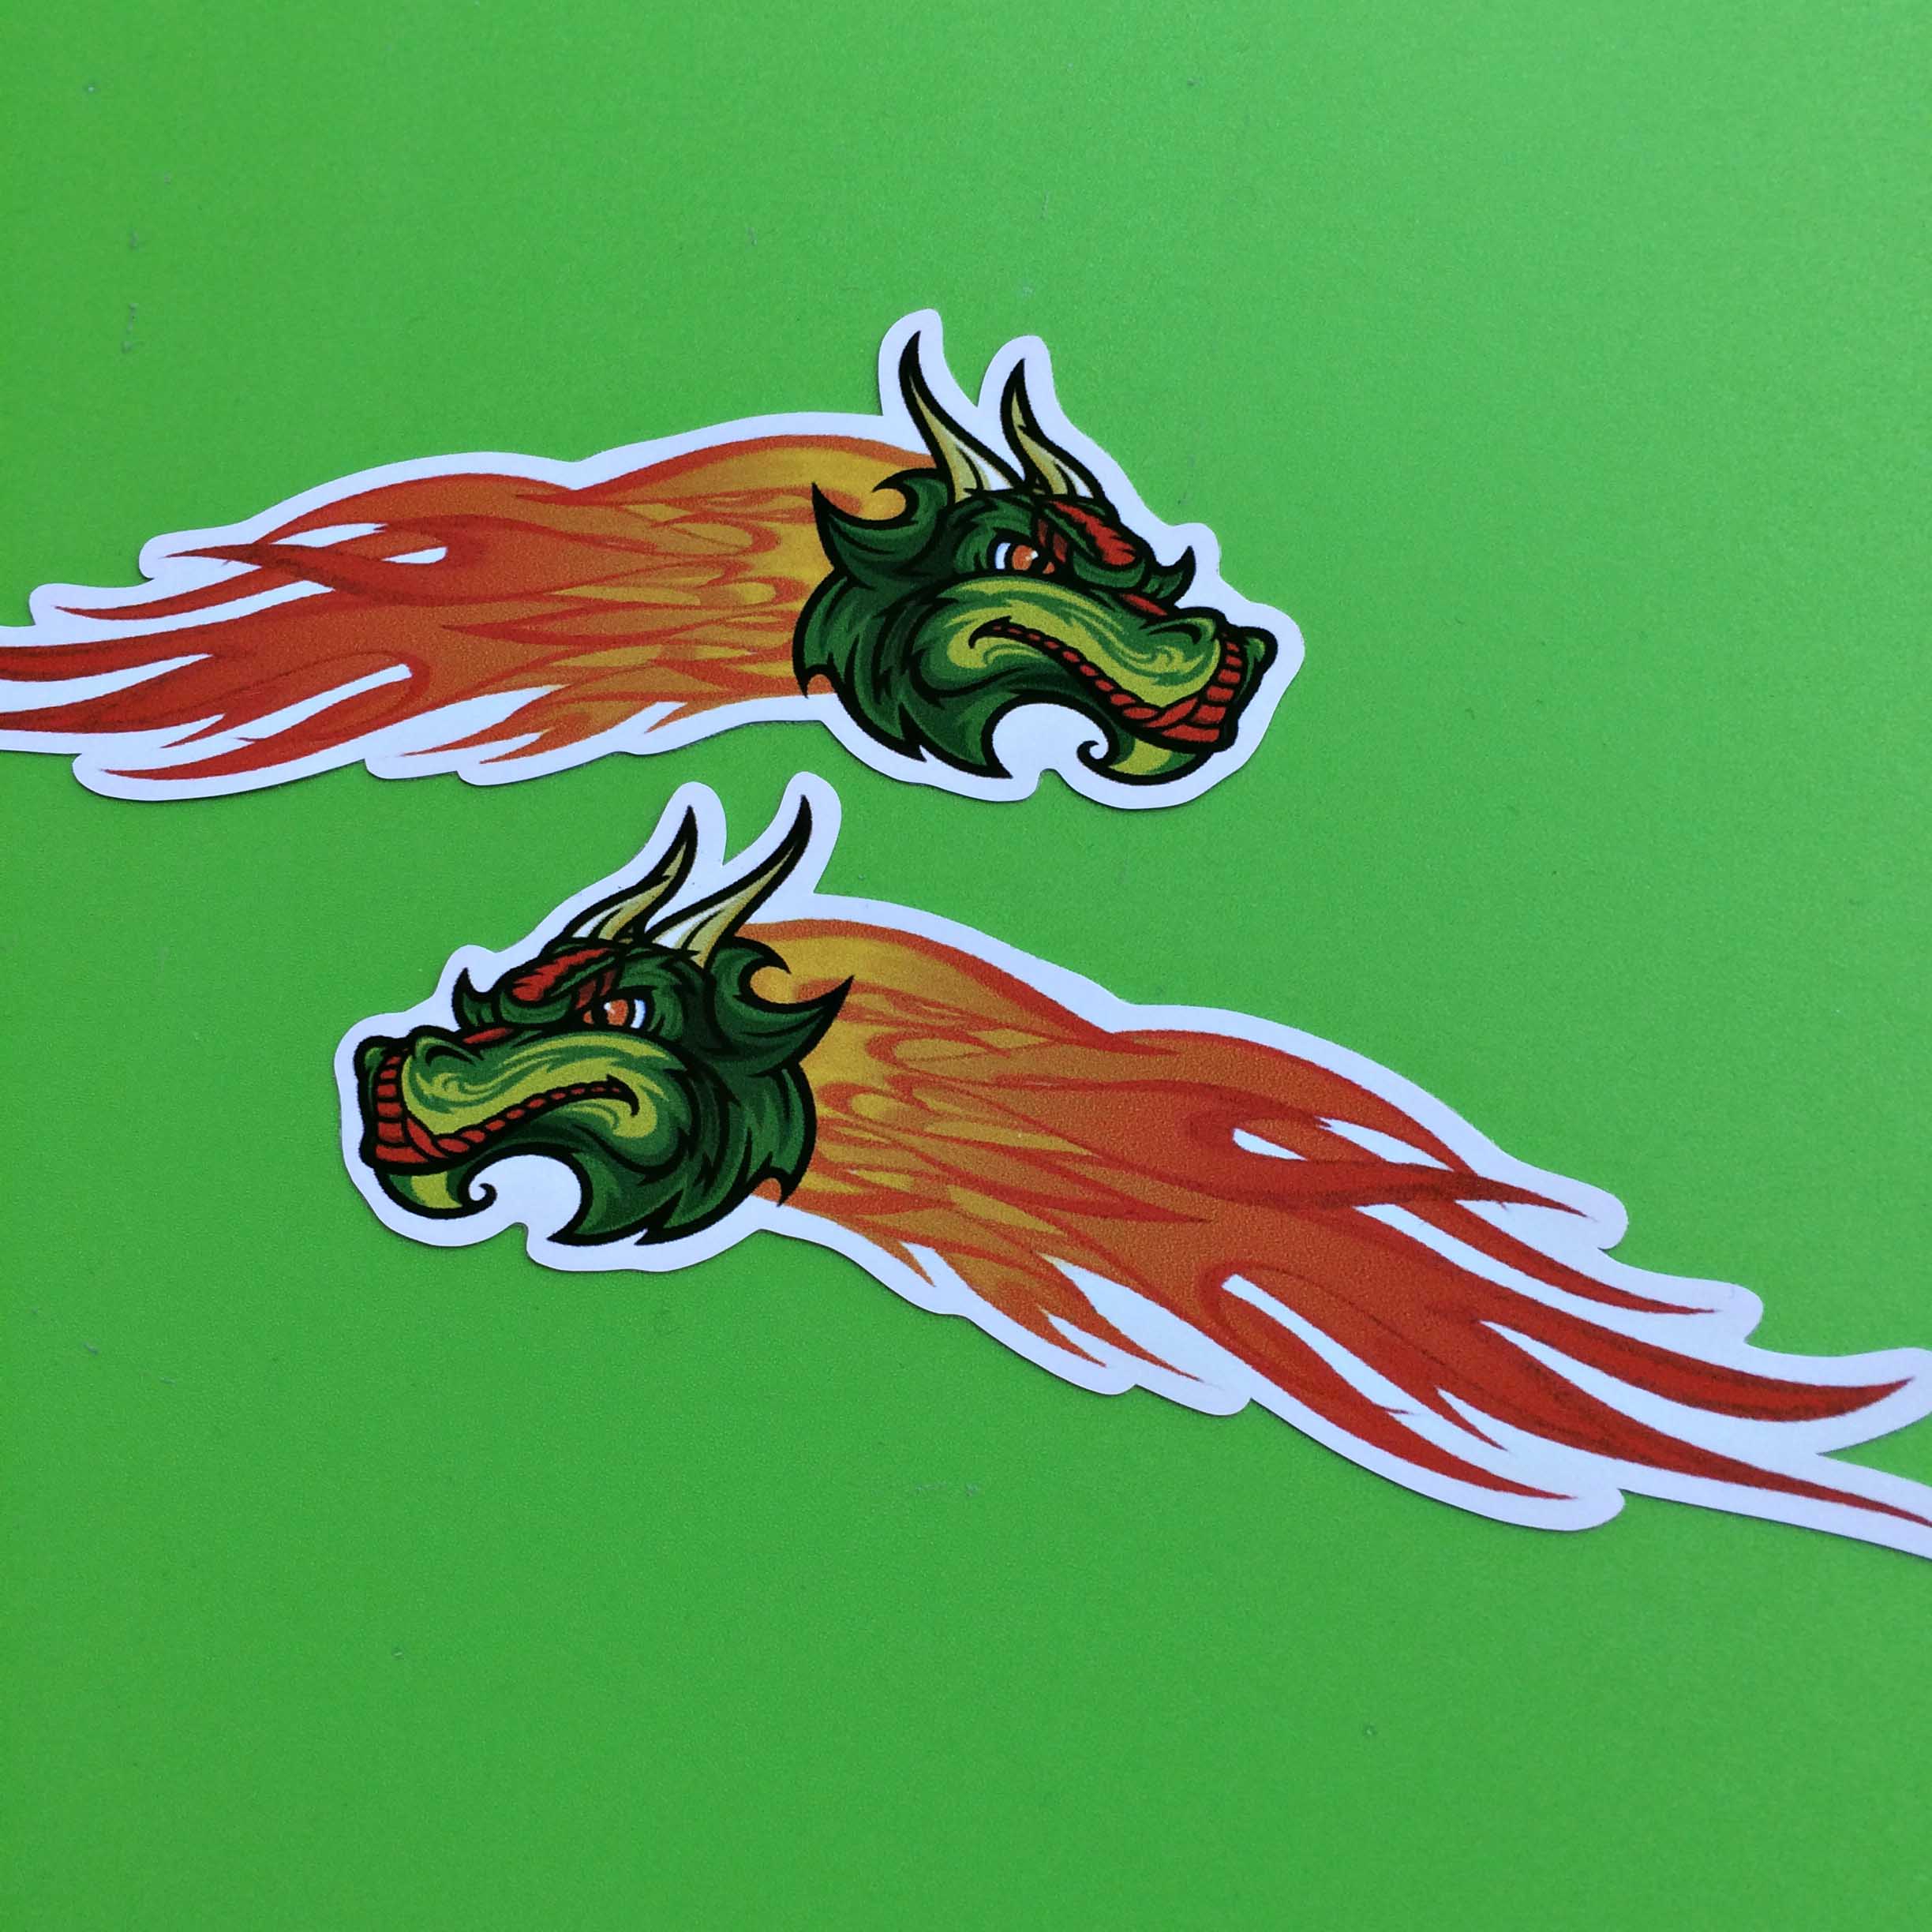 A head of a dragon, green with horns and piercing red eyes. Orange and red flames are trailing behind.